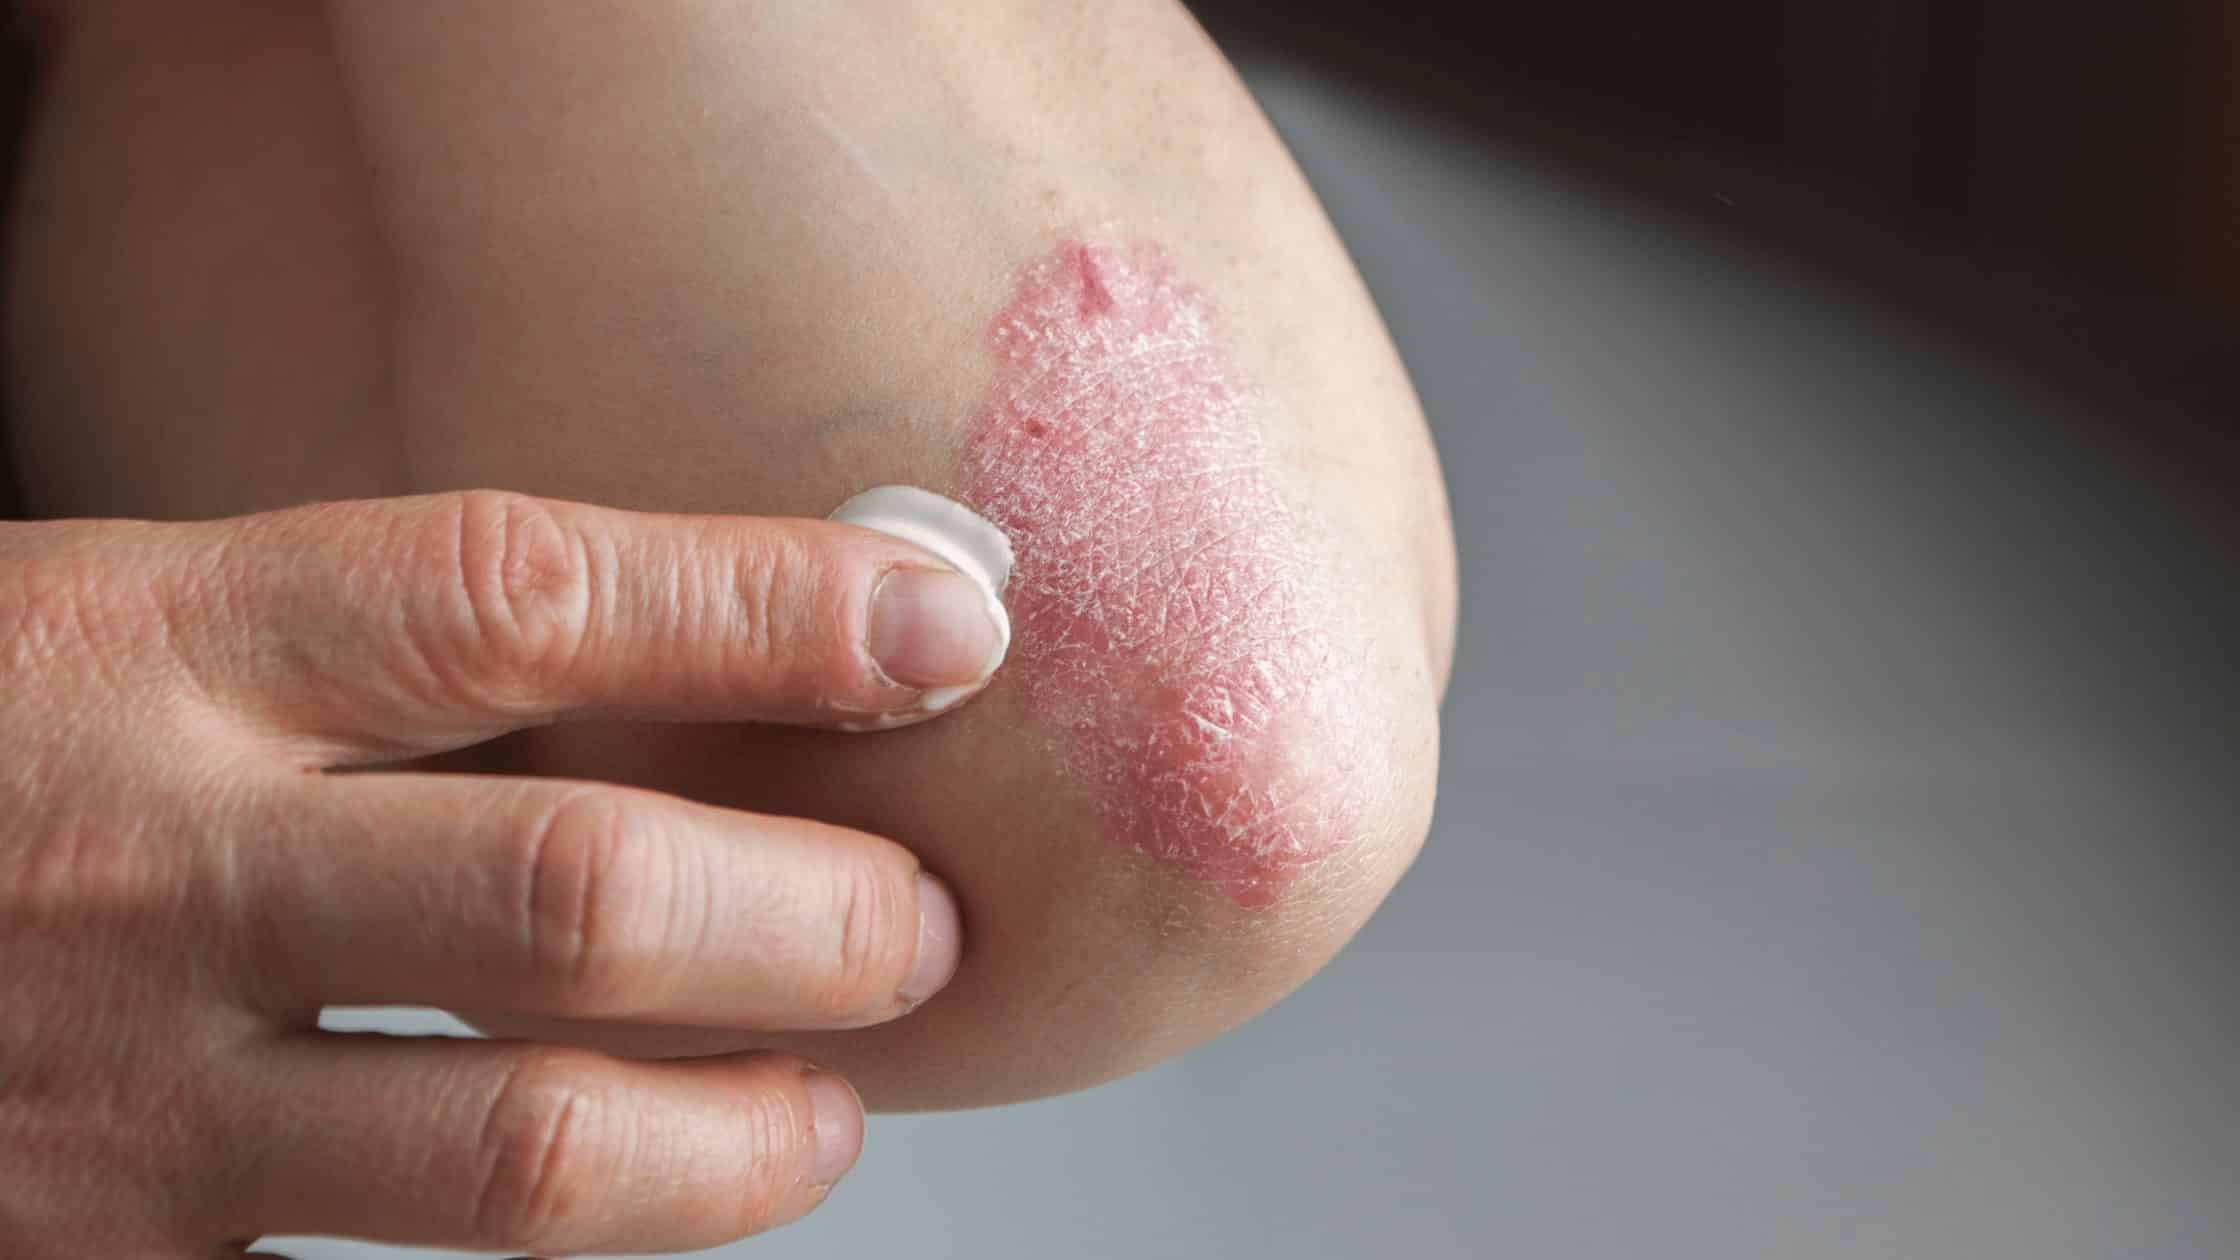 Person's elbow with psoriasis applying ointment